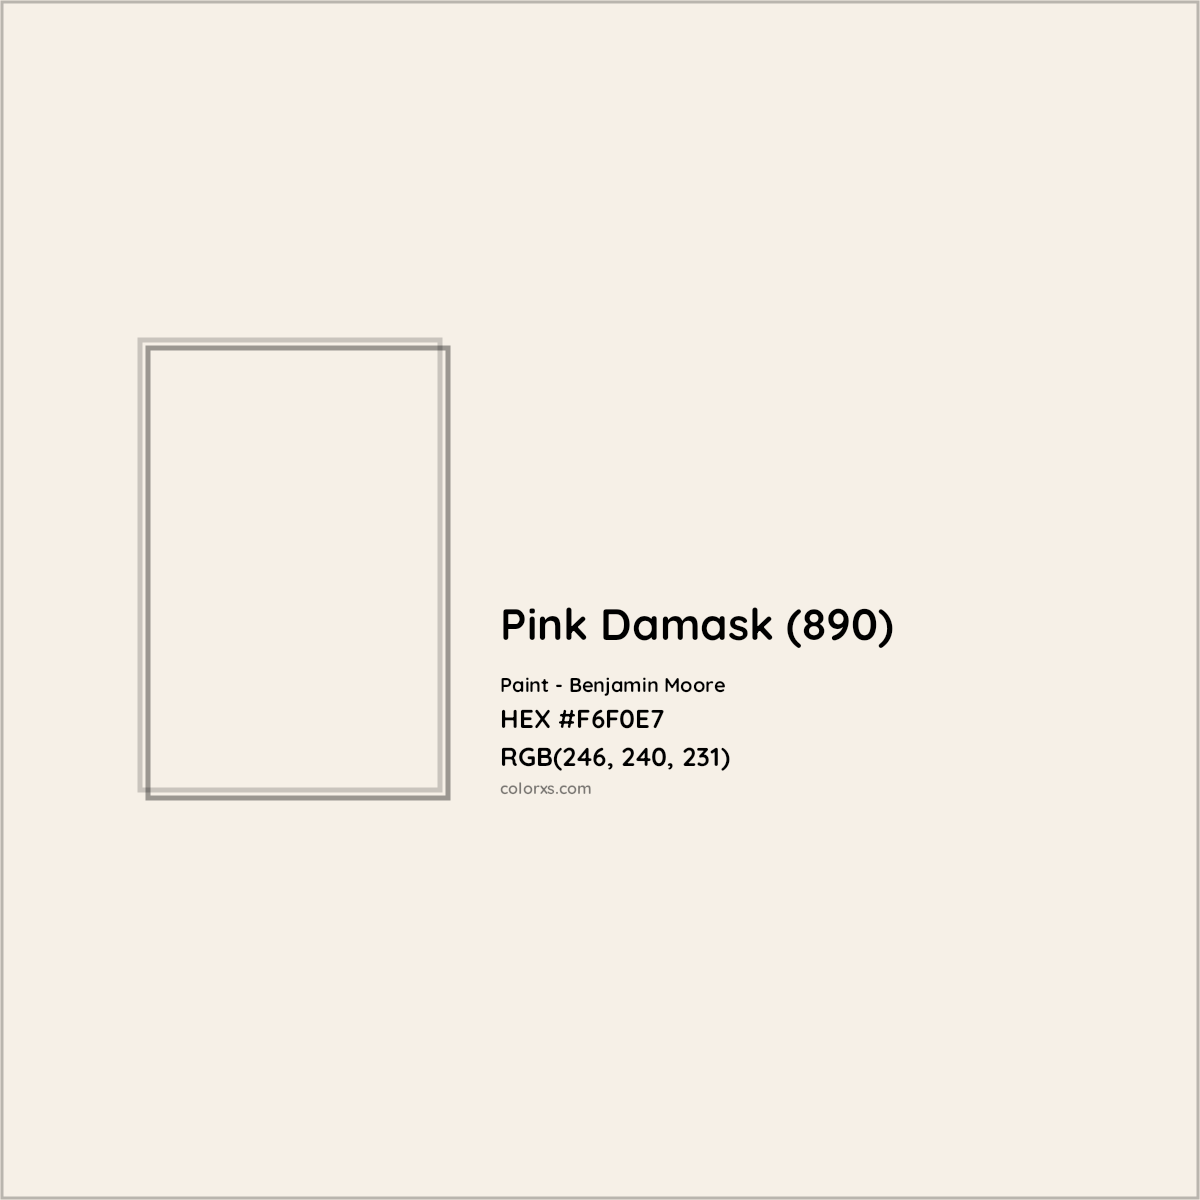 HEX #F6F0E7 Pink Damask (890) Paint Benjamin Moore - Color Code